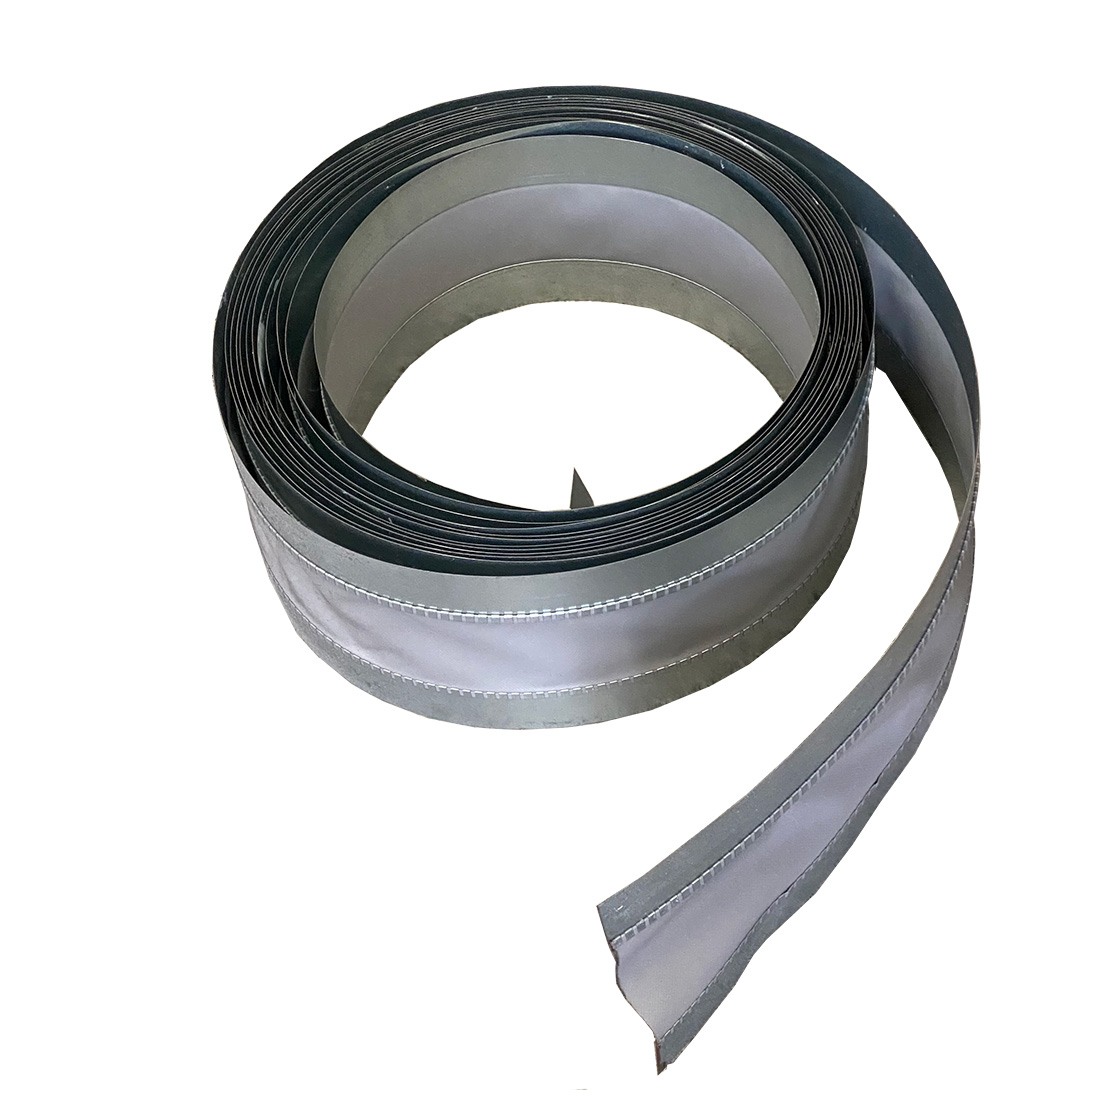 75mm PVC coated Flexible duct Connector Band